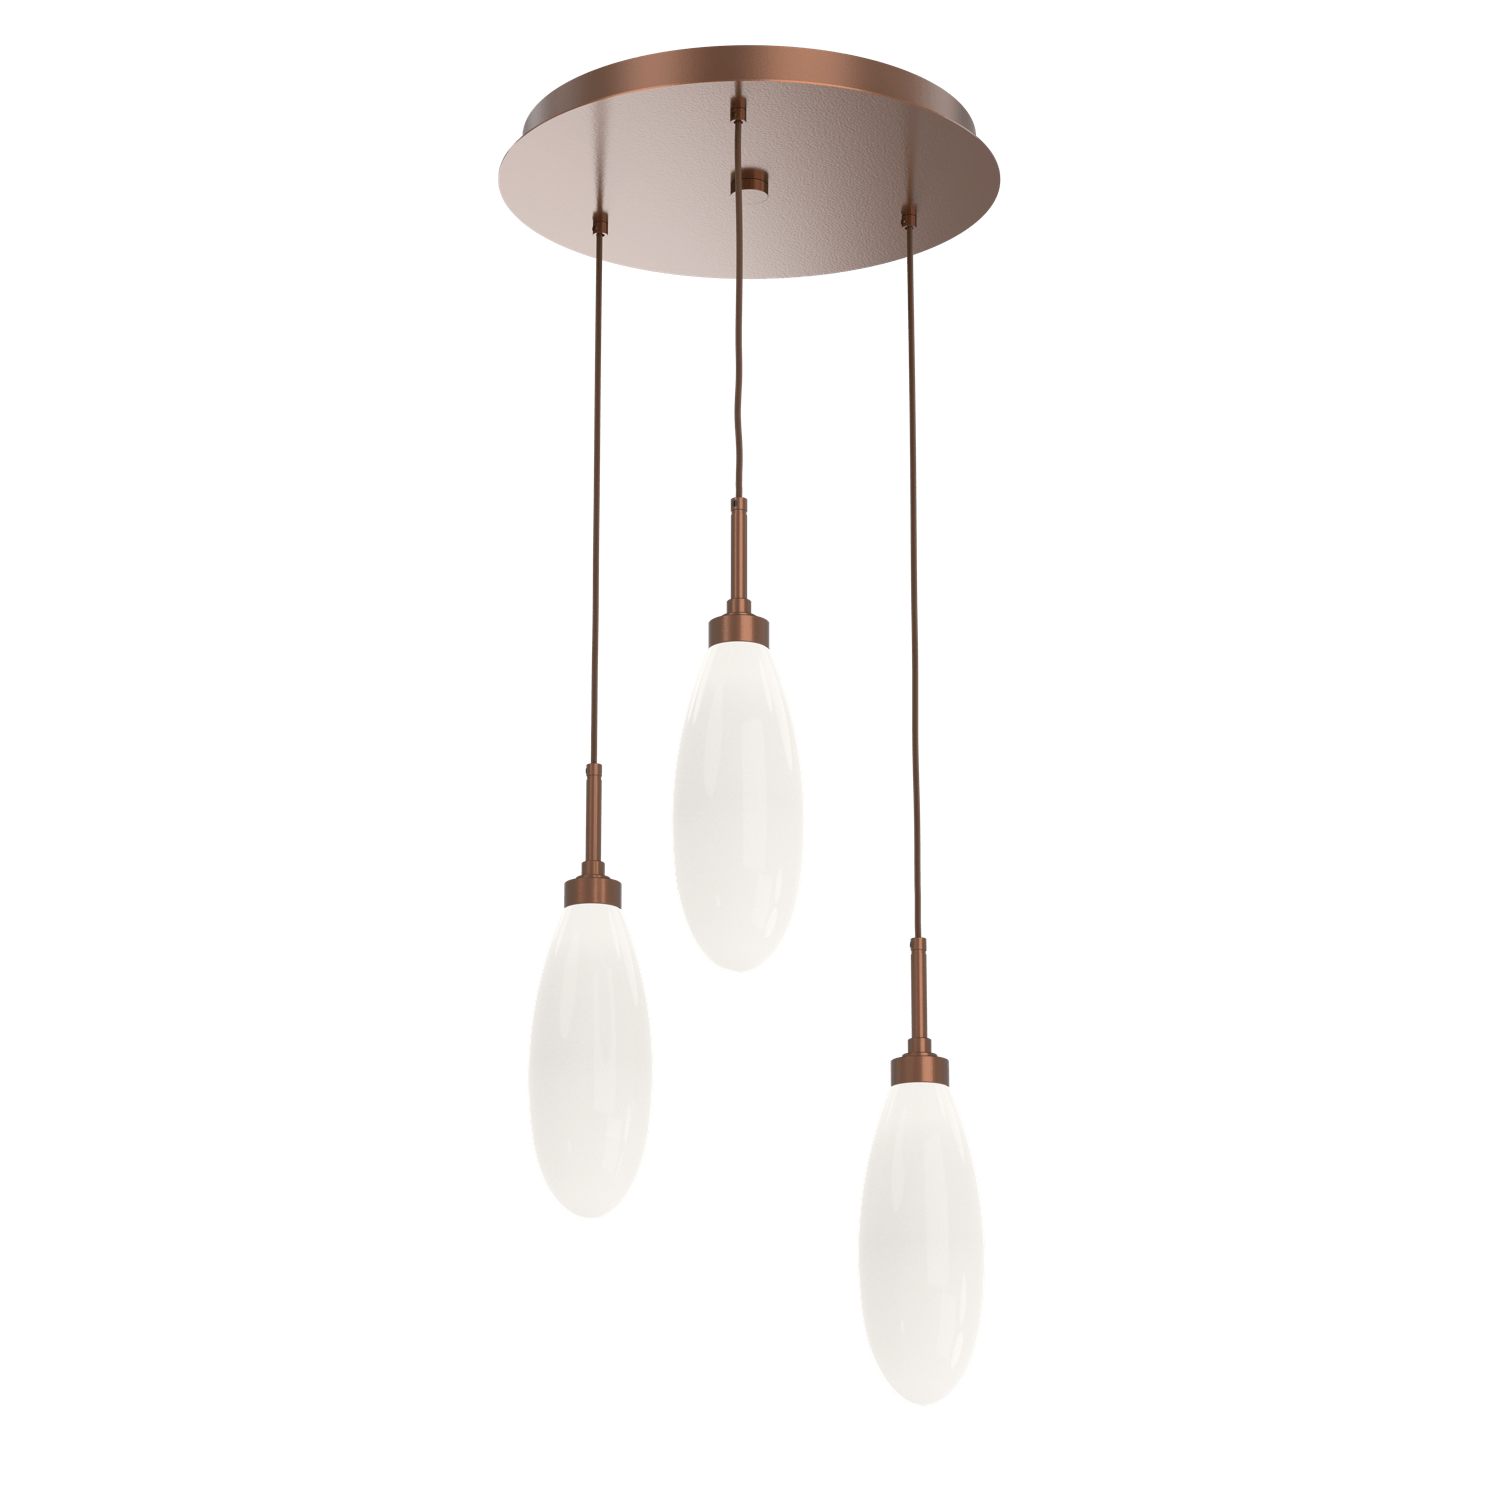 CHB0071-03-BB-WL-LL-Hammerton-Studio-Fiori-3-light-round-pendant-chandelier-with-burnished-bronze-finish-and-opal-white-glass-shades-and-LED-lamping